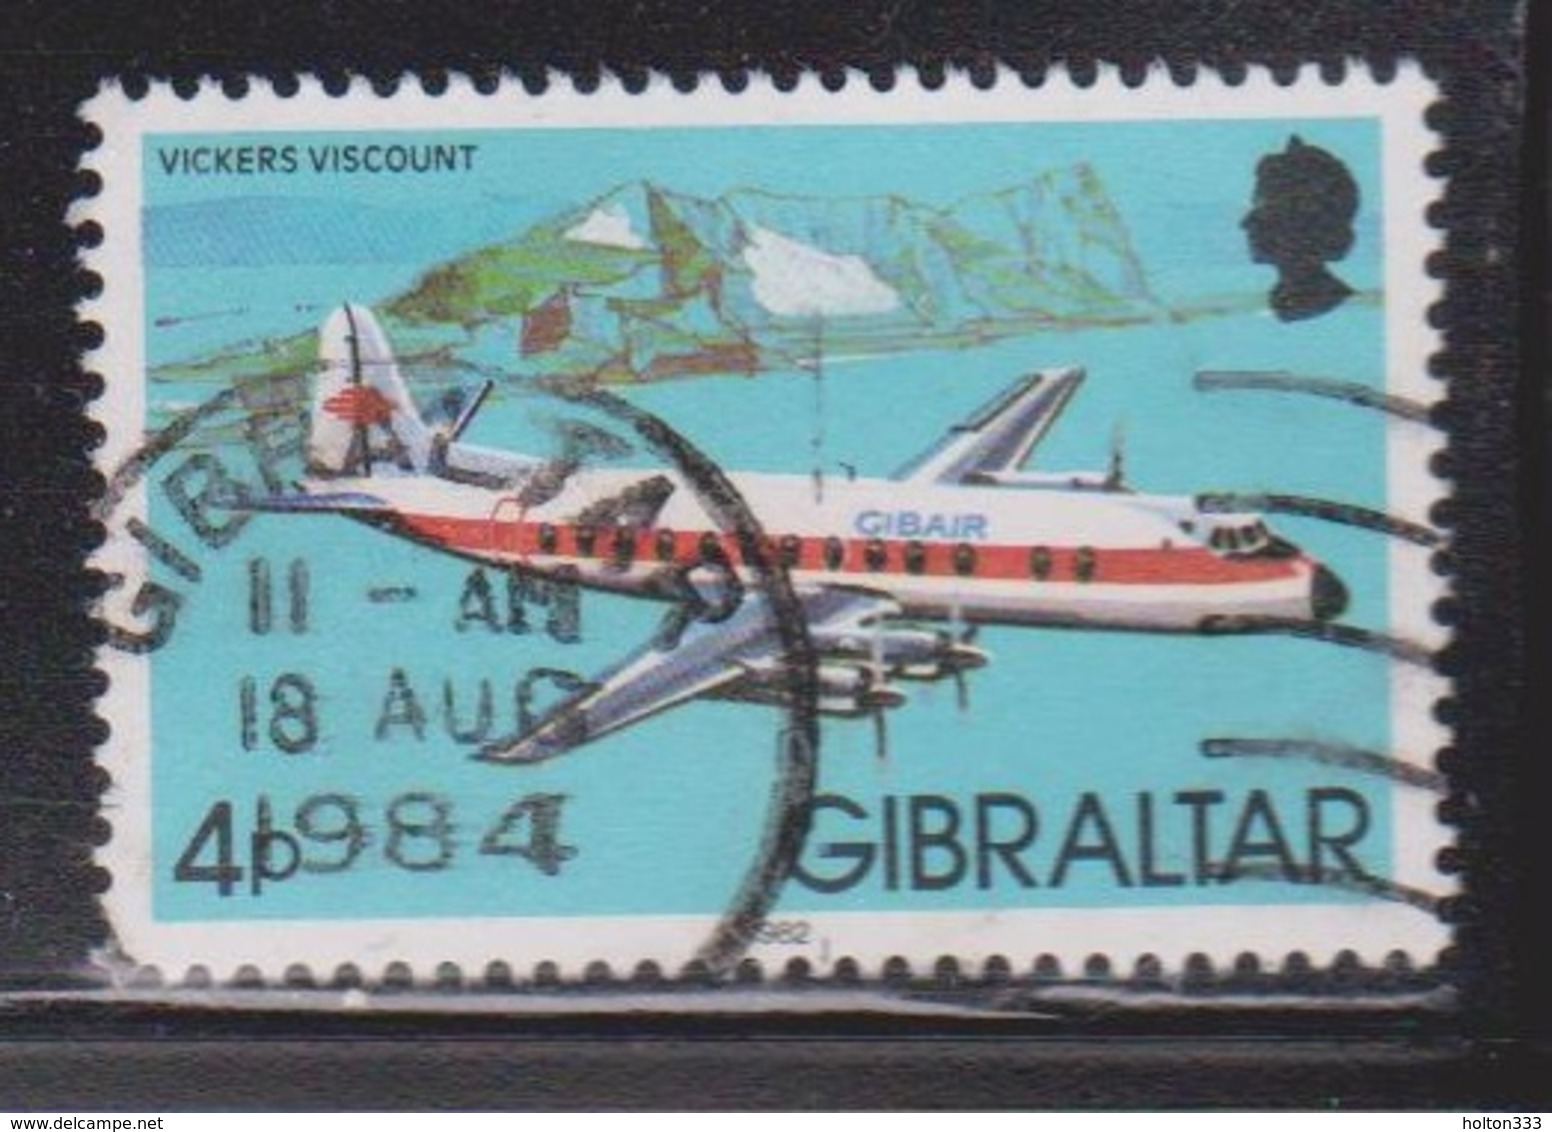 GIBRALTAR Scott # 419 Used - Airplane - Vickers Vicount - Gibraltar